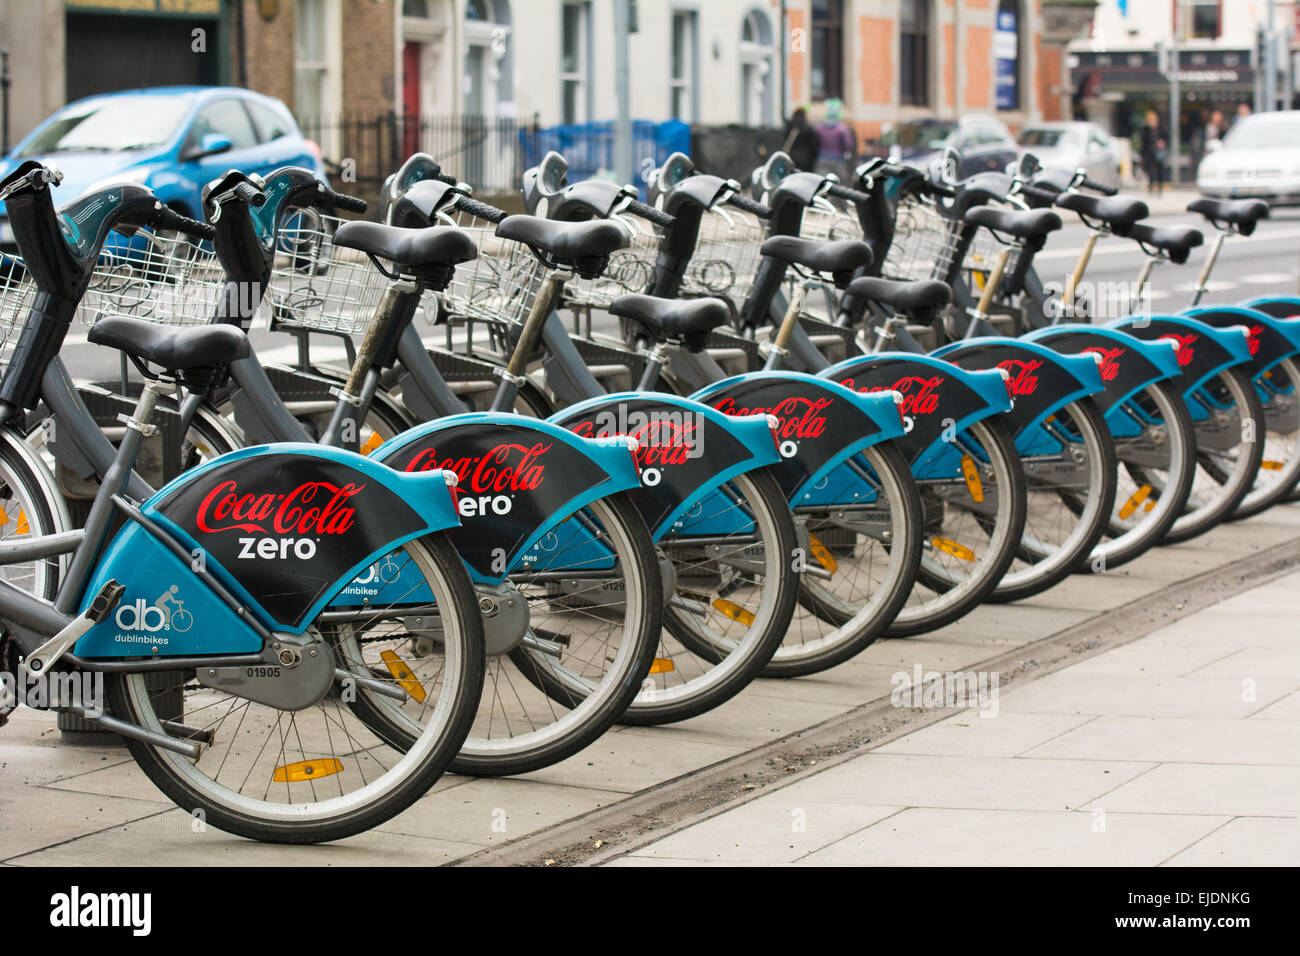 Dublin Bike Scheme bicycles lined up at station sponsored by Coca Cola Zero Stock Photo